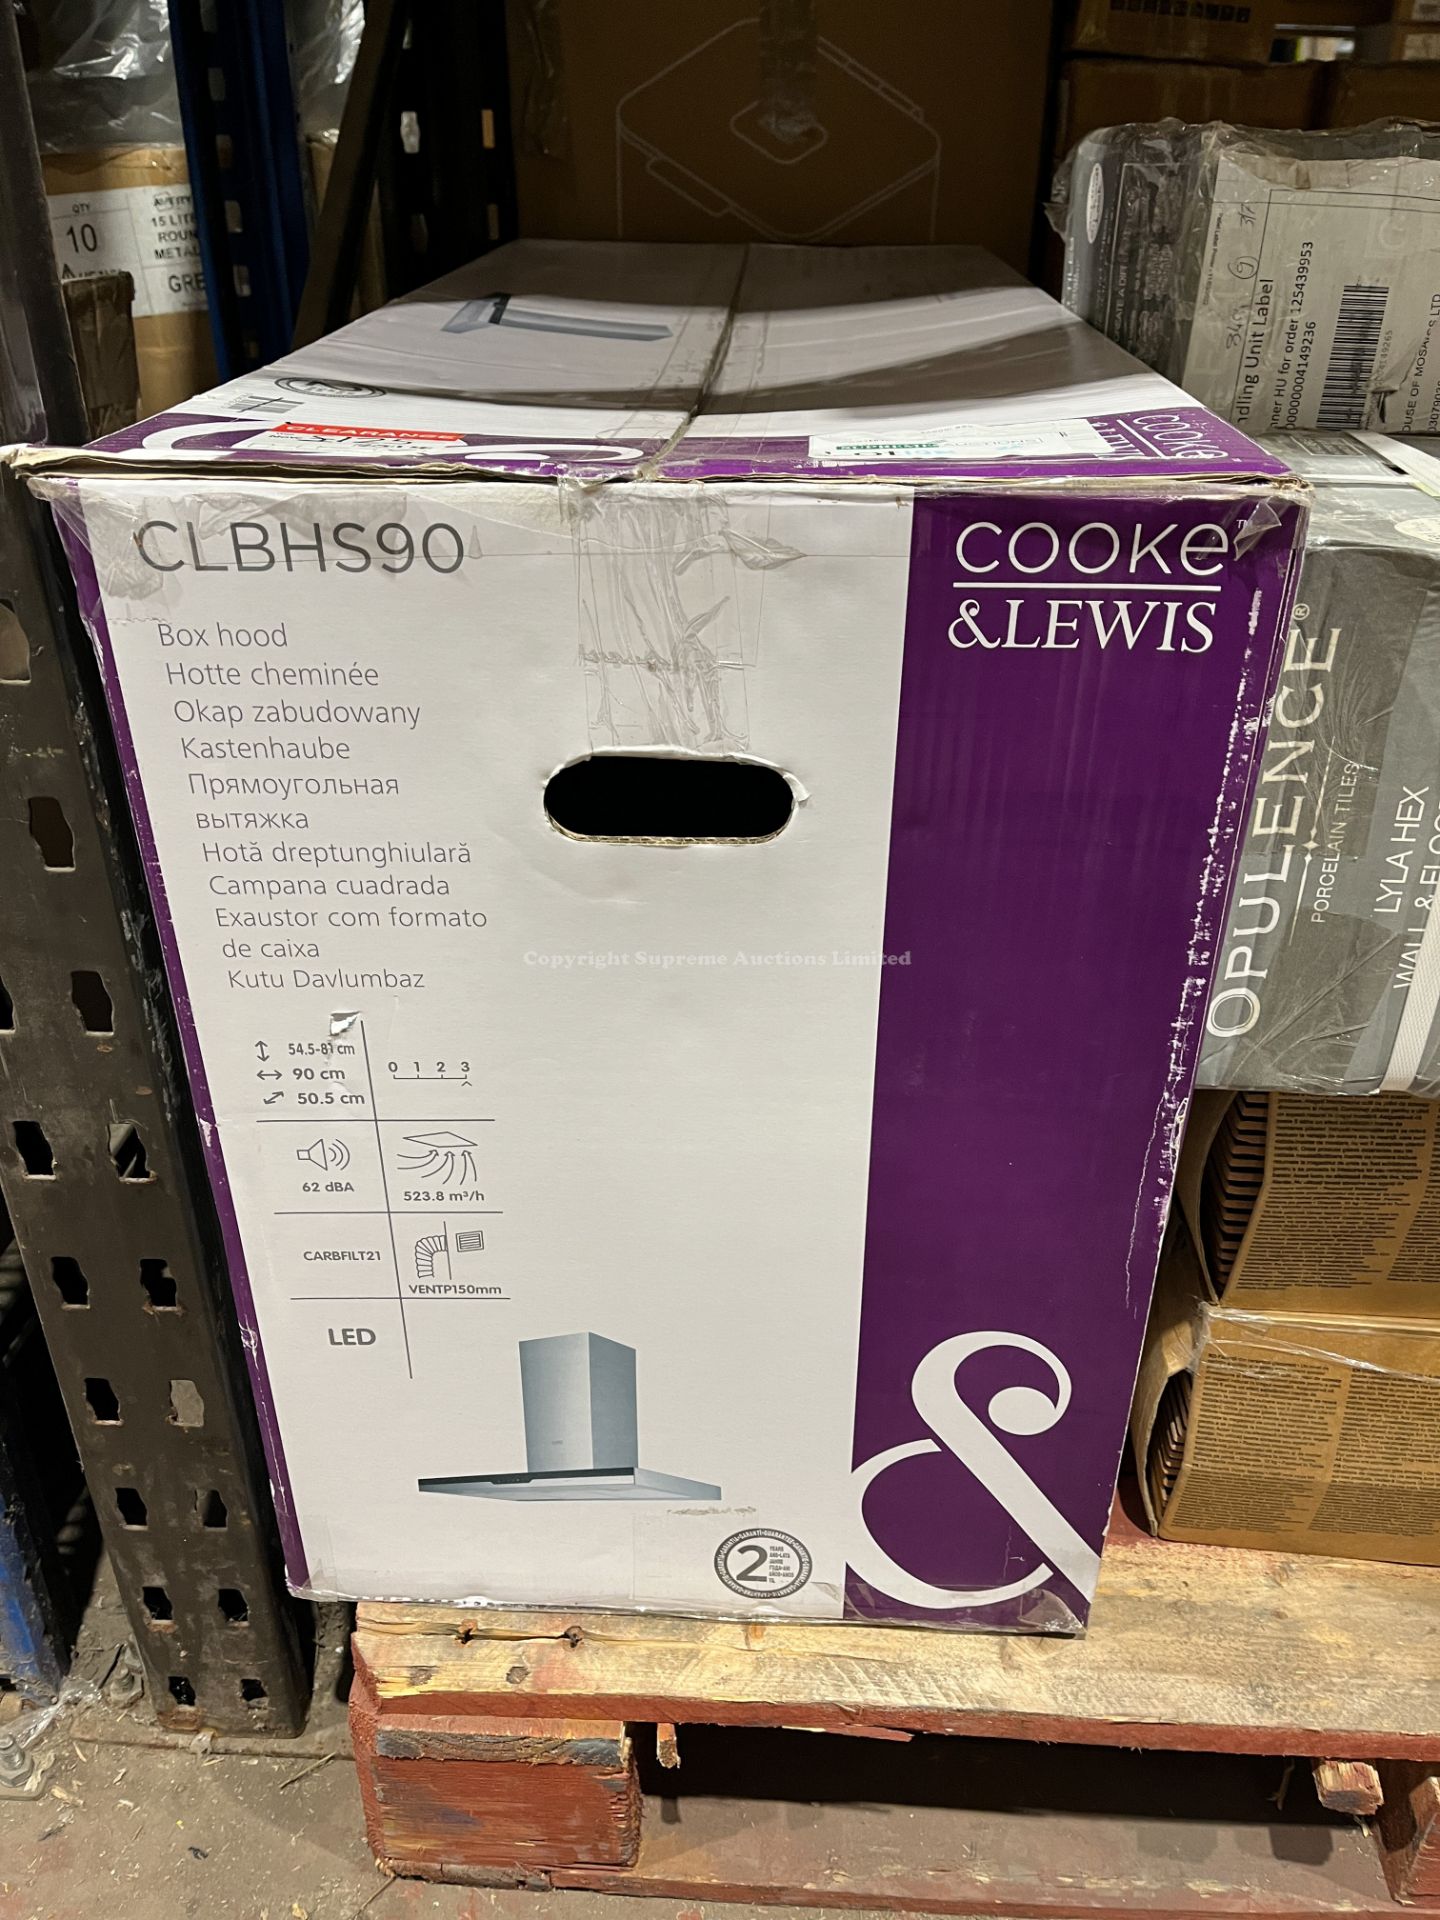 COOKE AND LEWIS CLBHS90 COOKER BOX HOOD R4-2